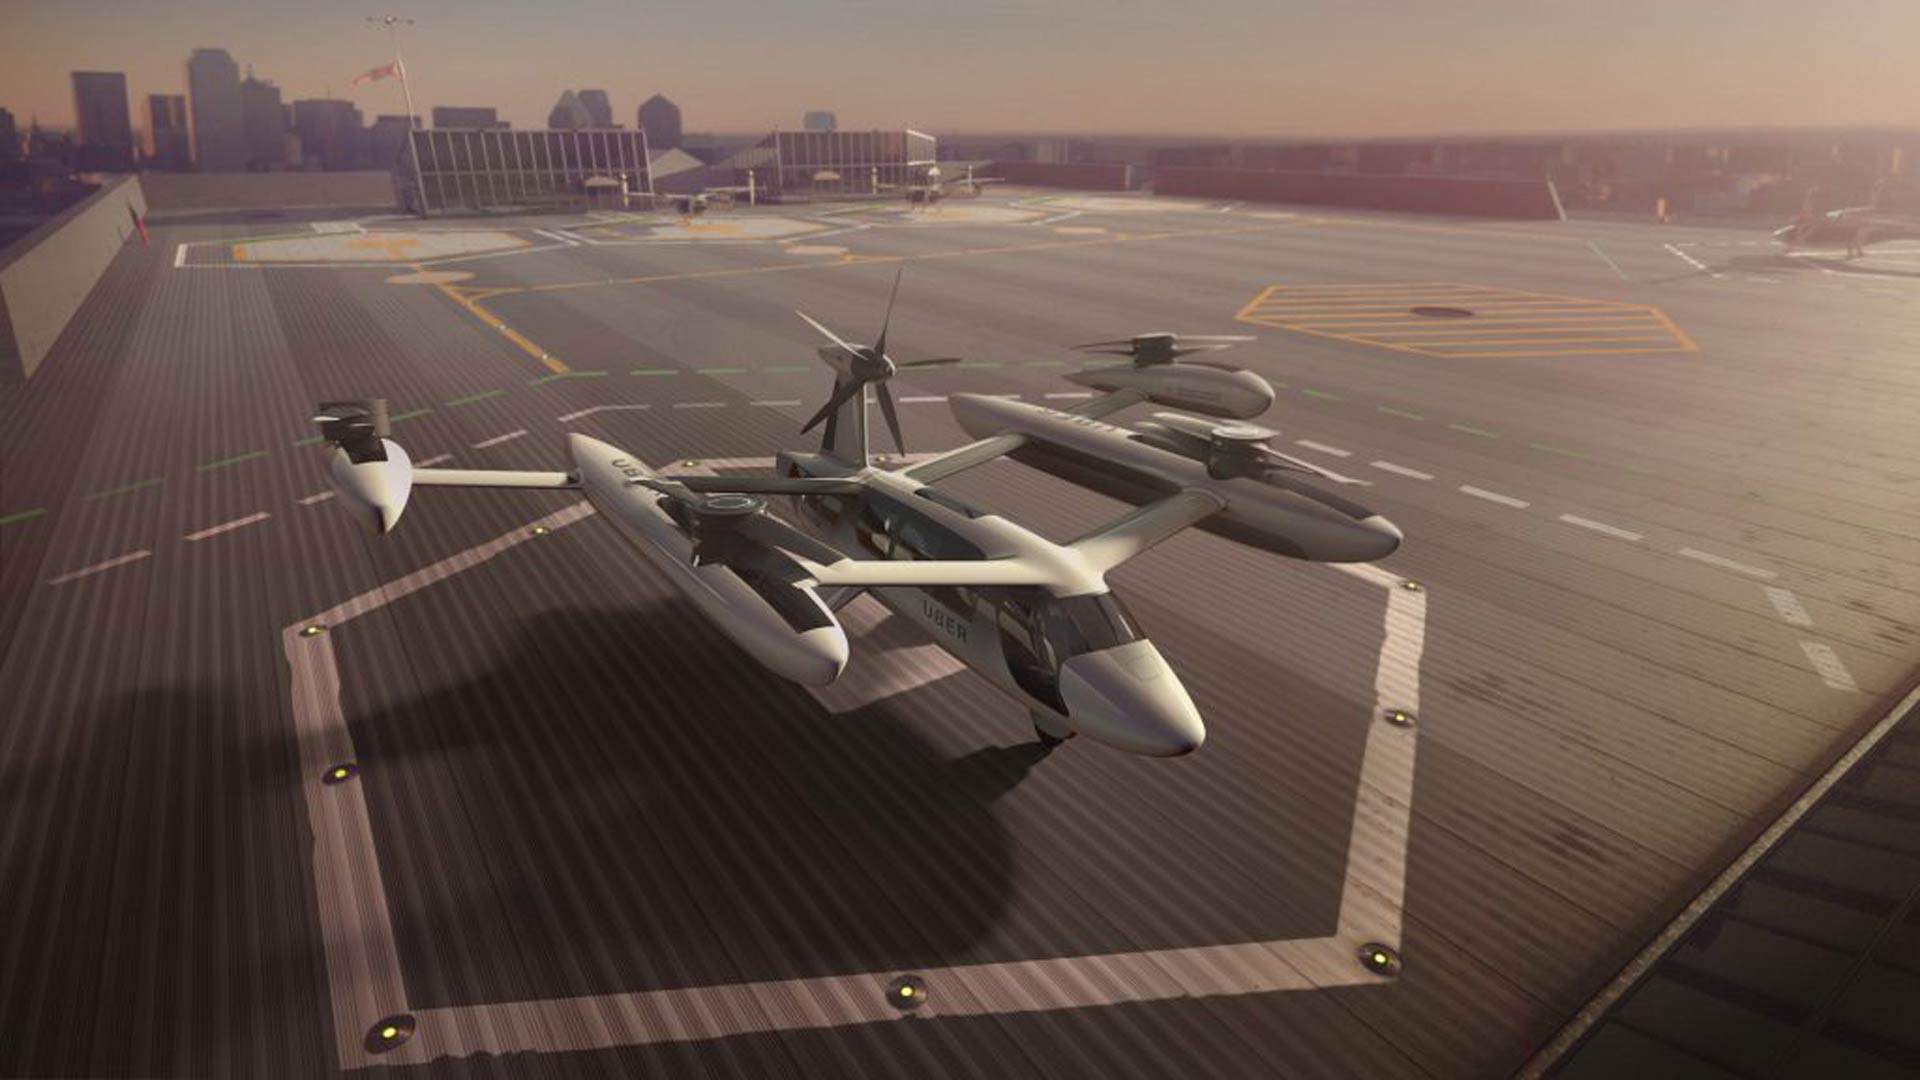 Melbourne Could Be One of the First Three Cities to Test Uber's Flying Taxis in 2020